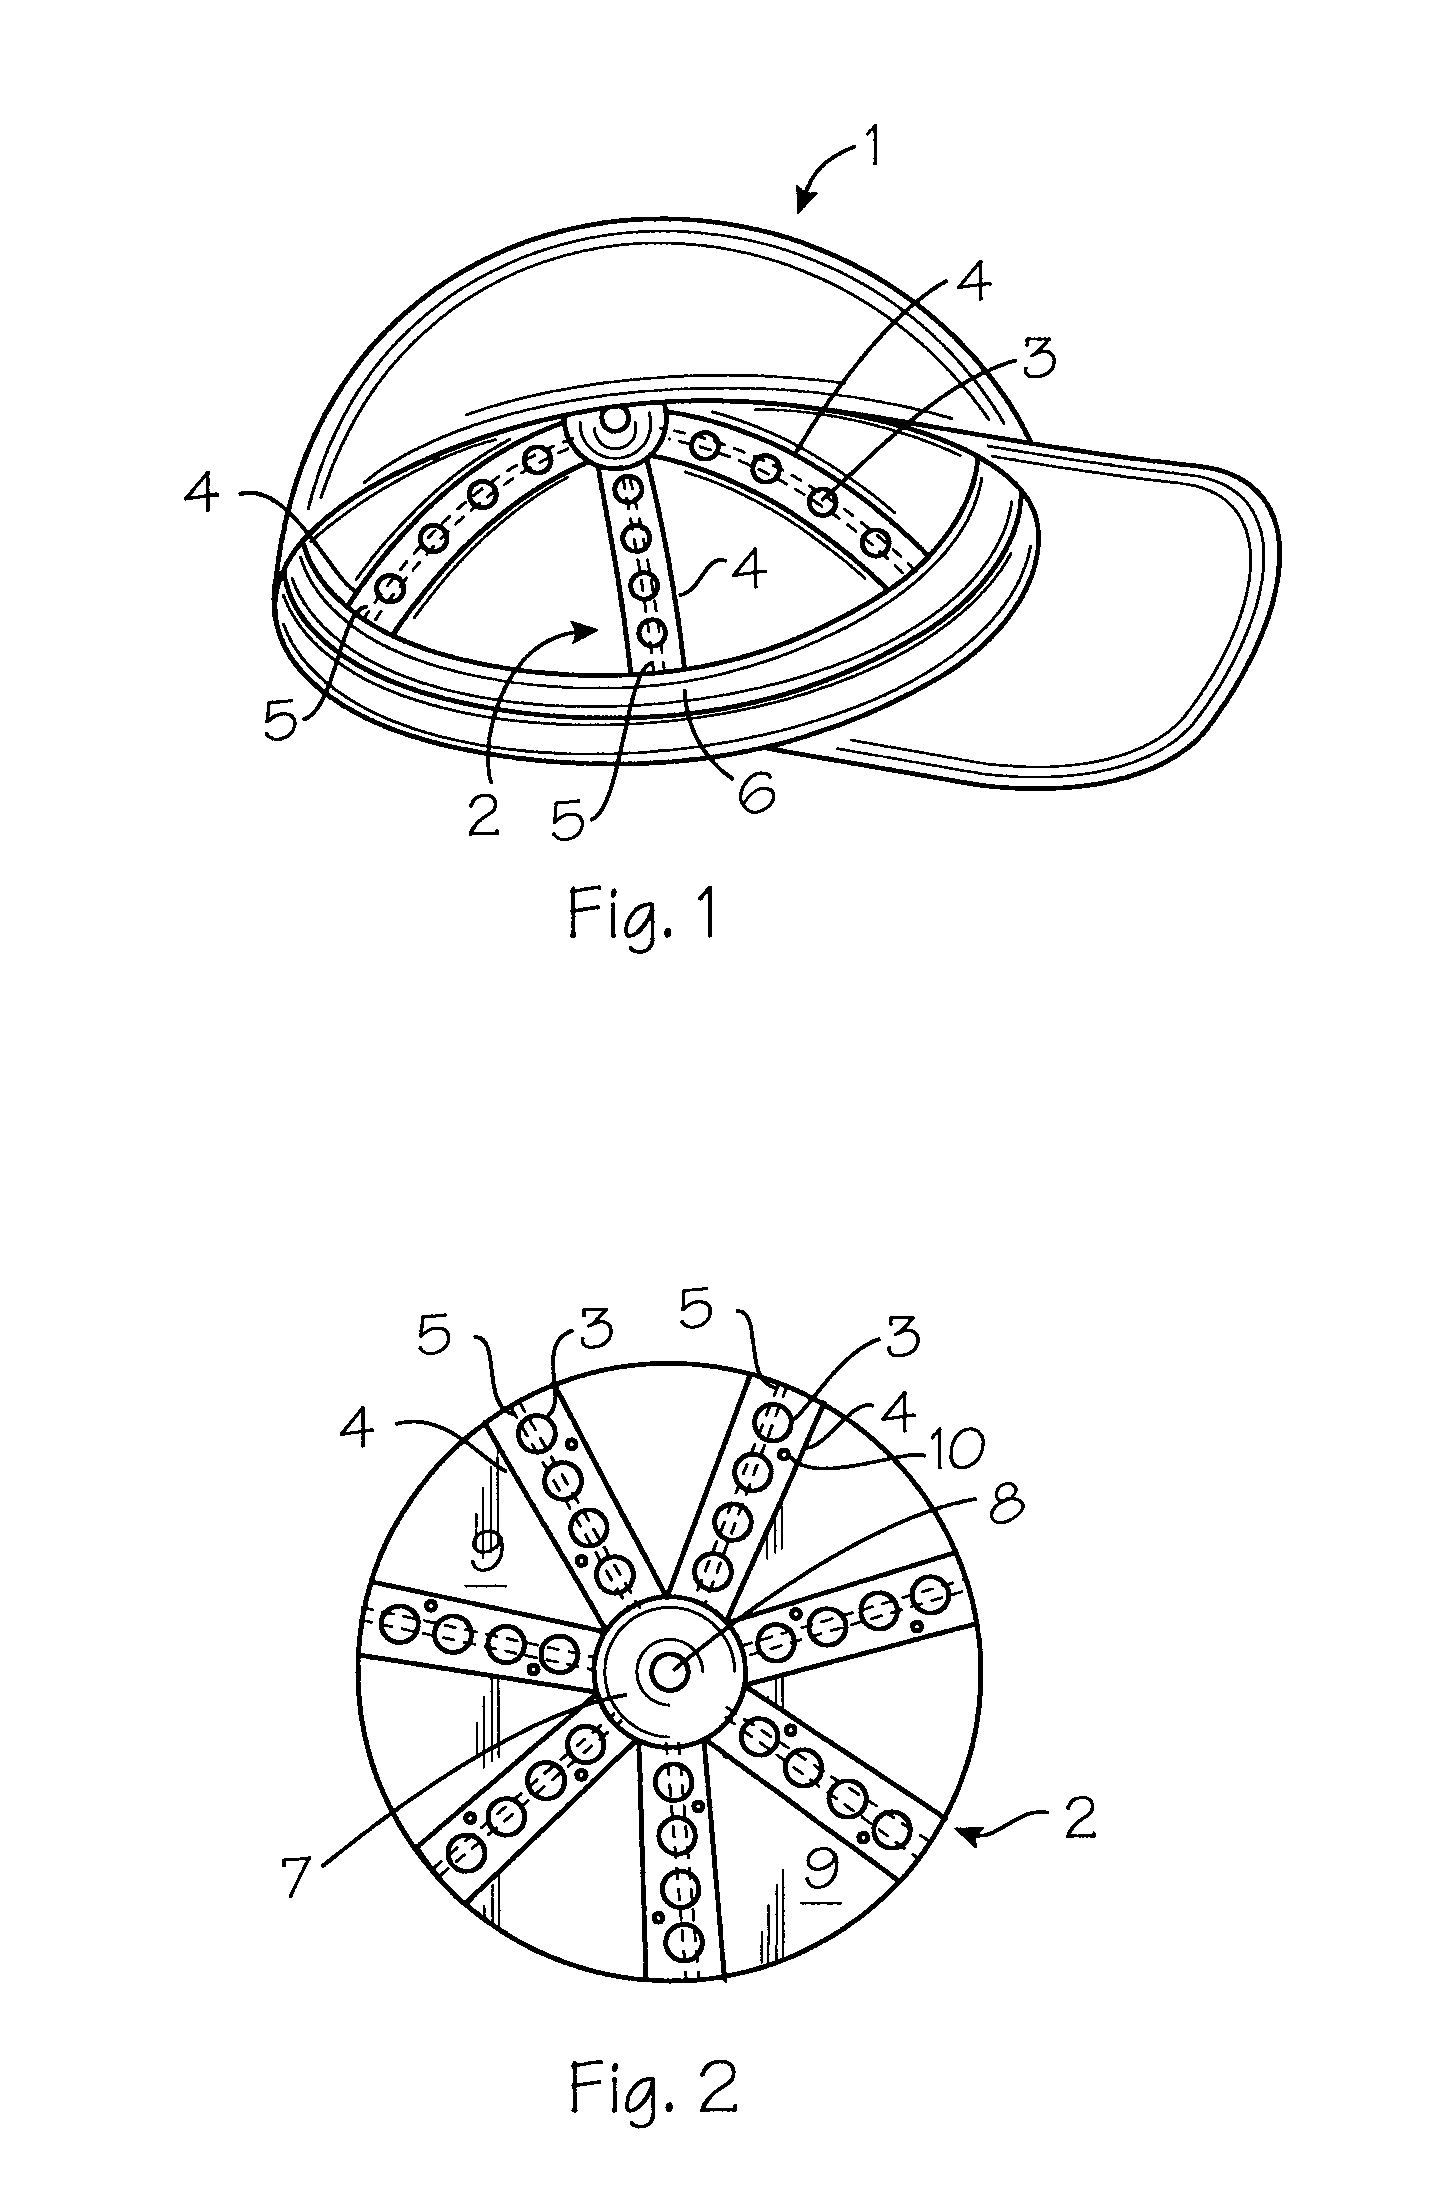 Ventilated device for delivery of agents to and through the human scalp